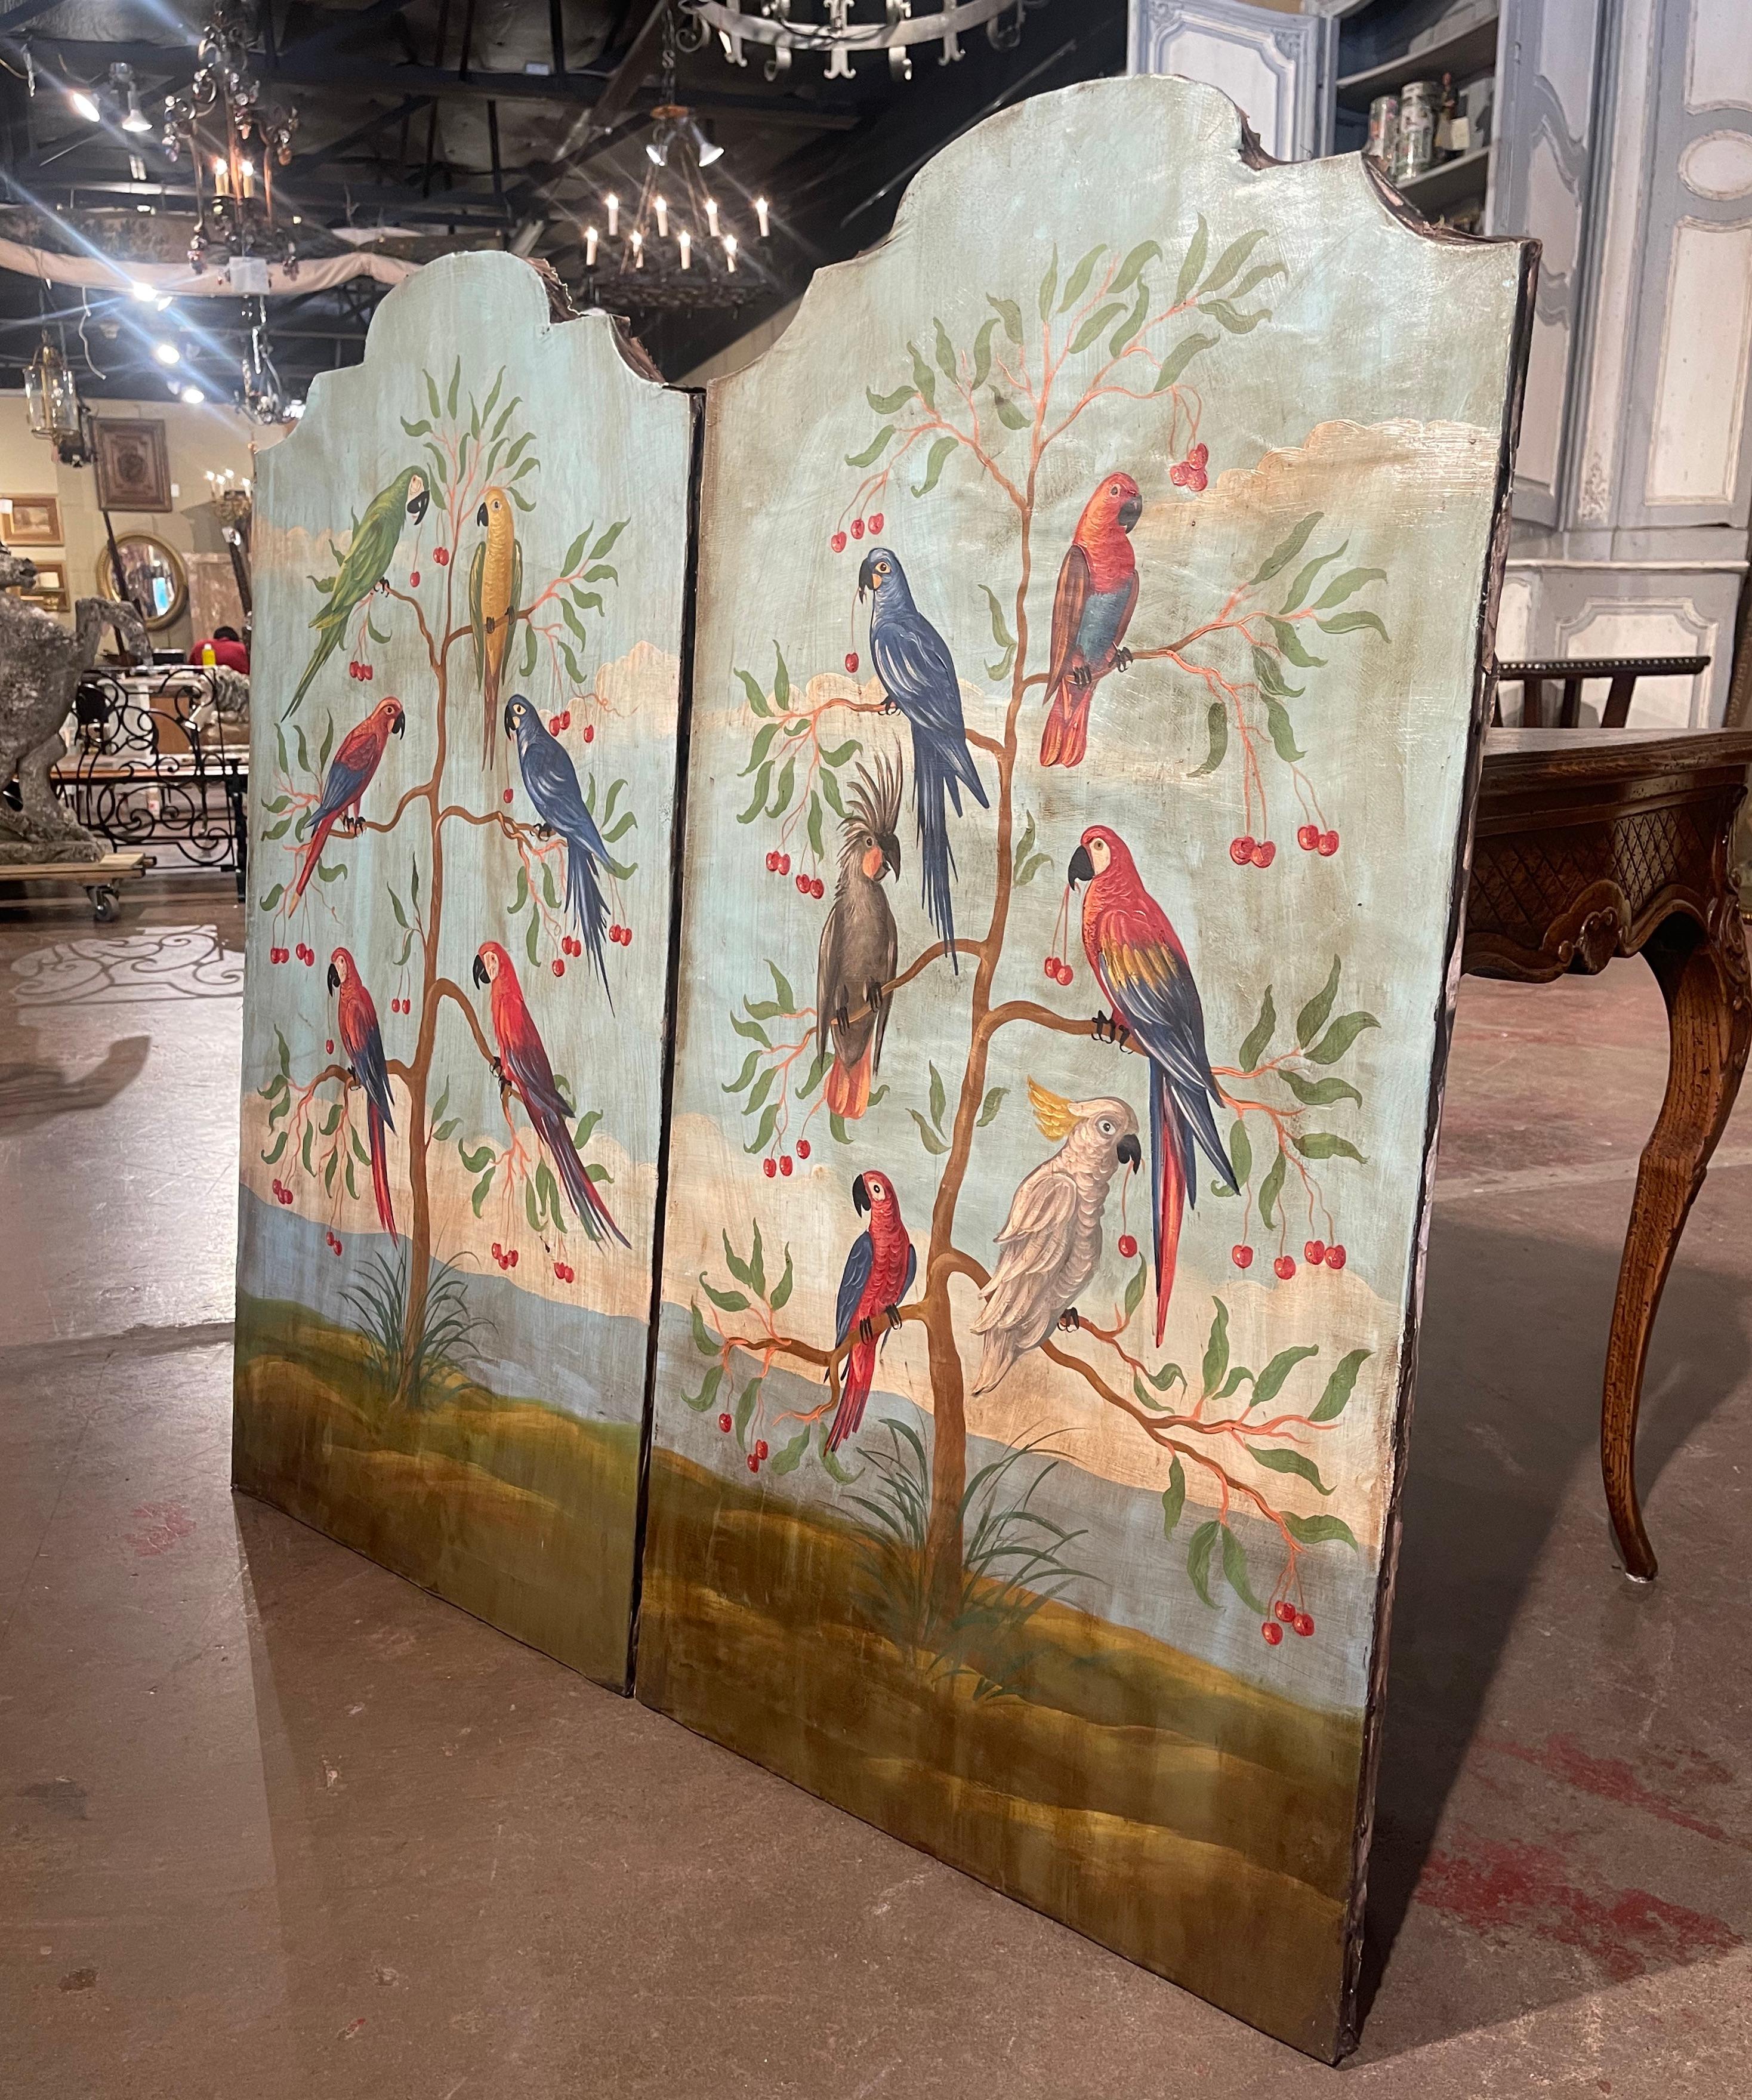 Decorate a living room, bedroom or den with this elegant pair of colorful parrot paintings! Crafted in Italy circa 1960, each hand painted canvas is set in a carved arched and scalloped frame. The first panel shows a greater sulphur-crested